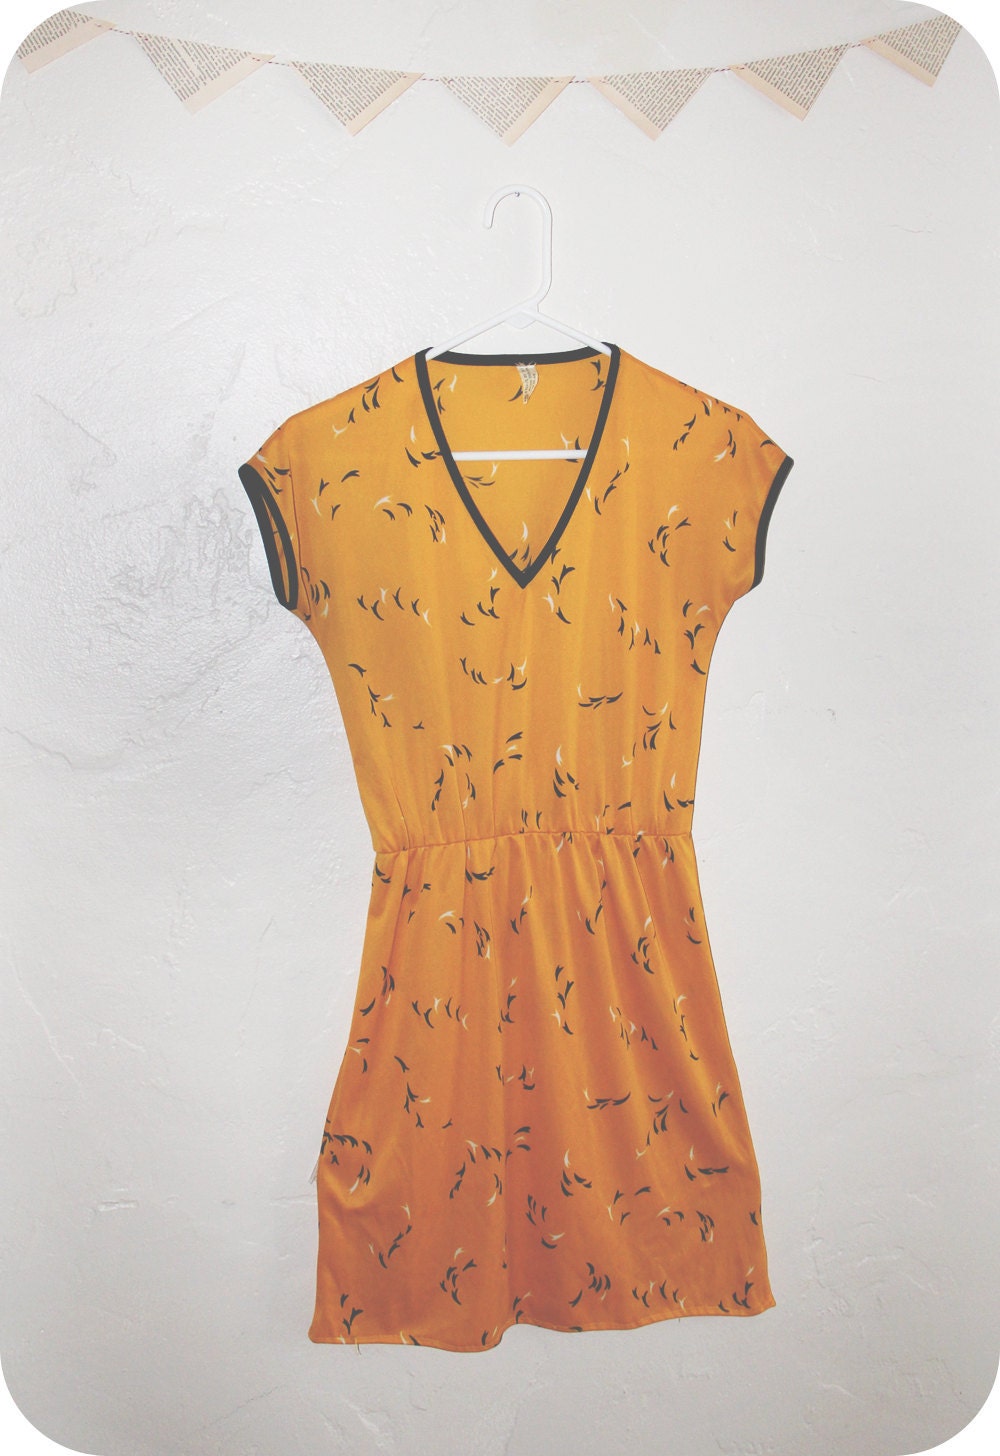 Vintage yellow mod dress with feather bird print in yellow and black ...